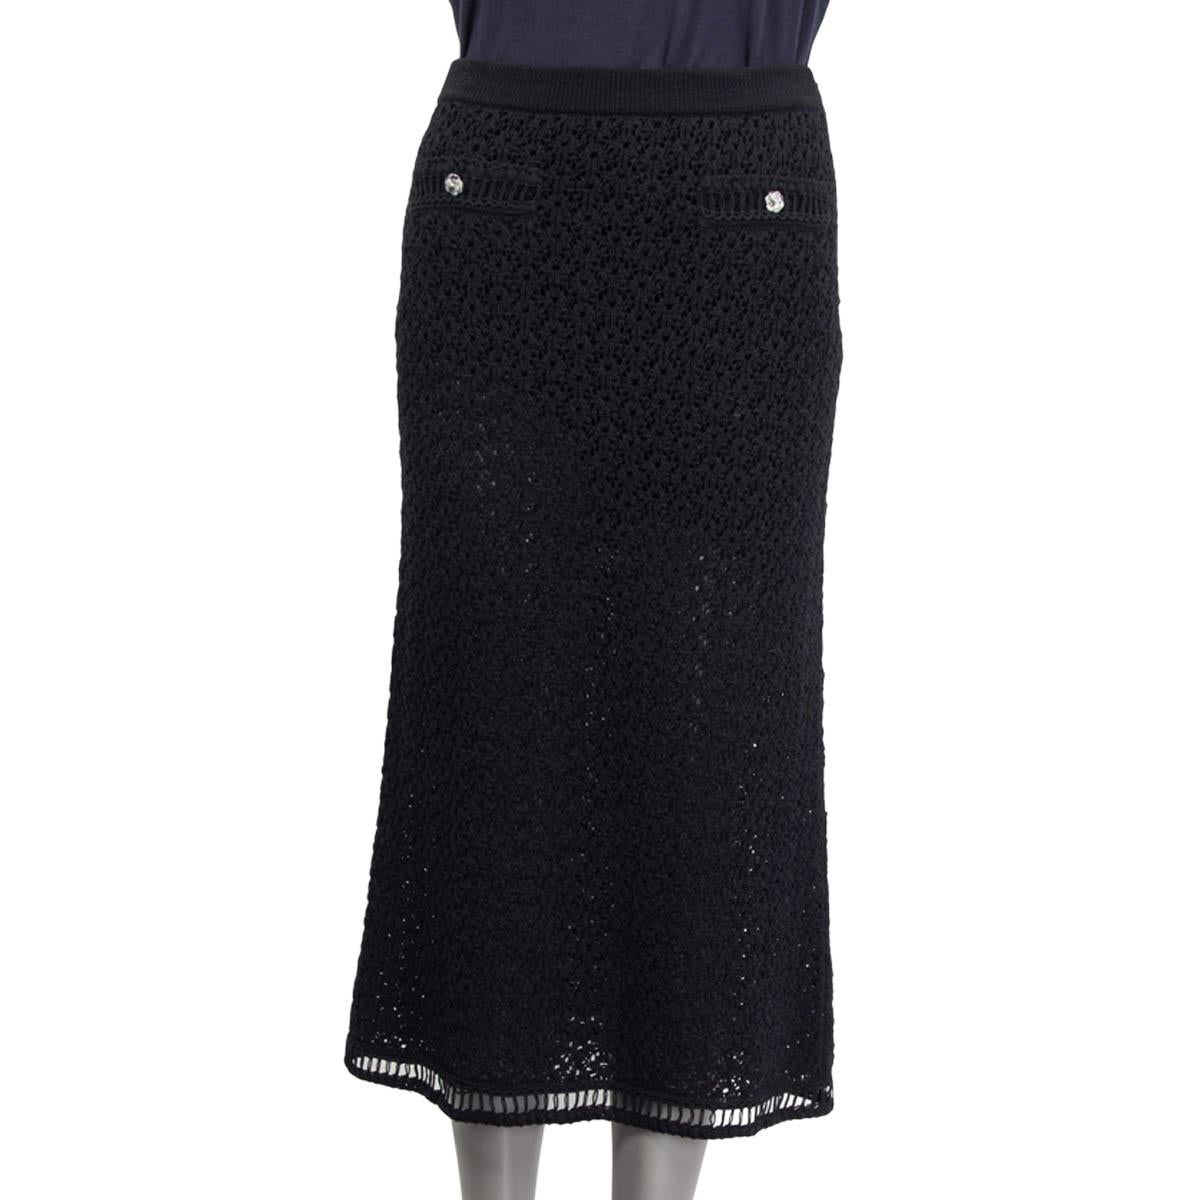 100% authentic  Chanel high rise crochet midi skirt in black cotton (65%) and polyamide (35%). Pre spring/summer 2020 collection. Embellished with two faux slit pockets and silver metallic flower buttons. Has an elastic waistband and opens with a